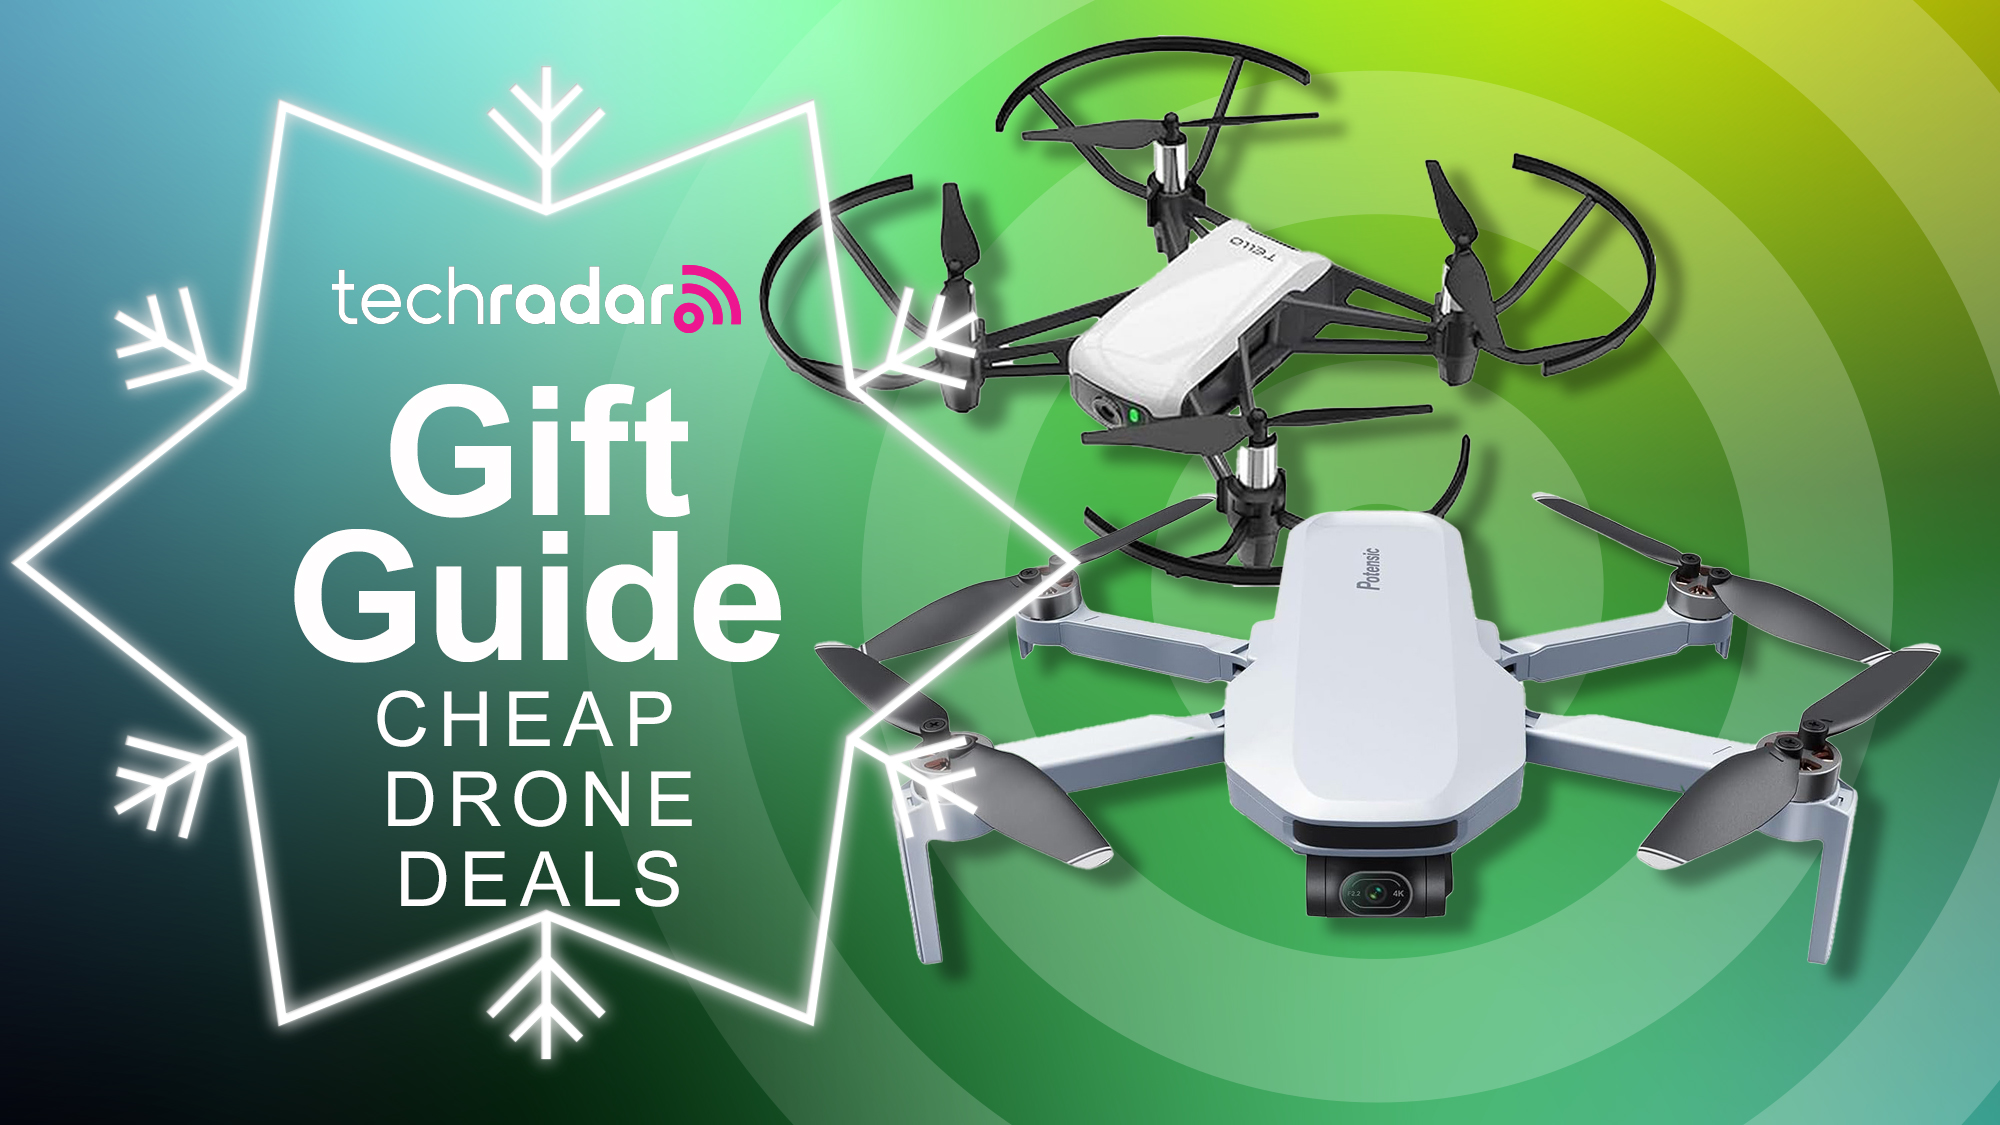 These cheap drones under 500 are great gift ideas for first time